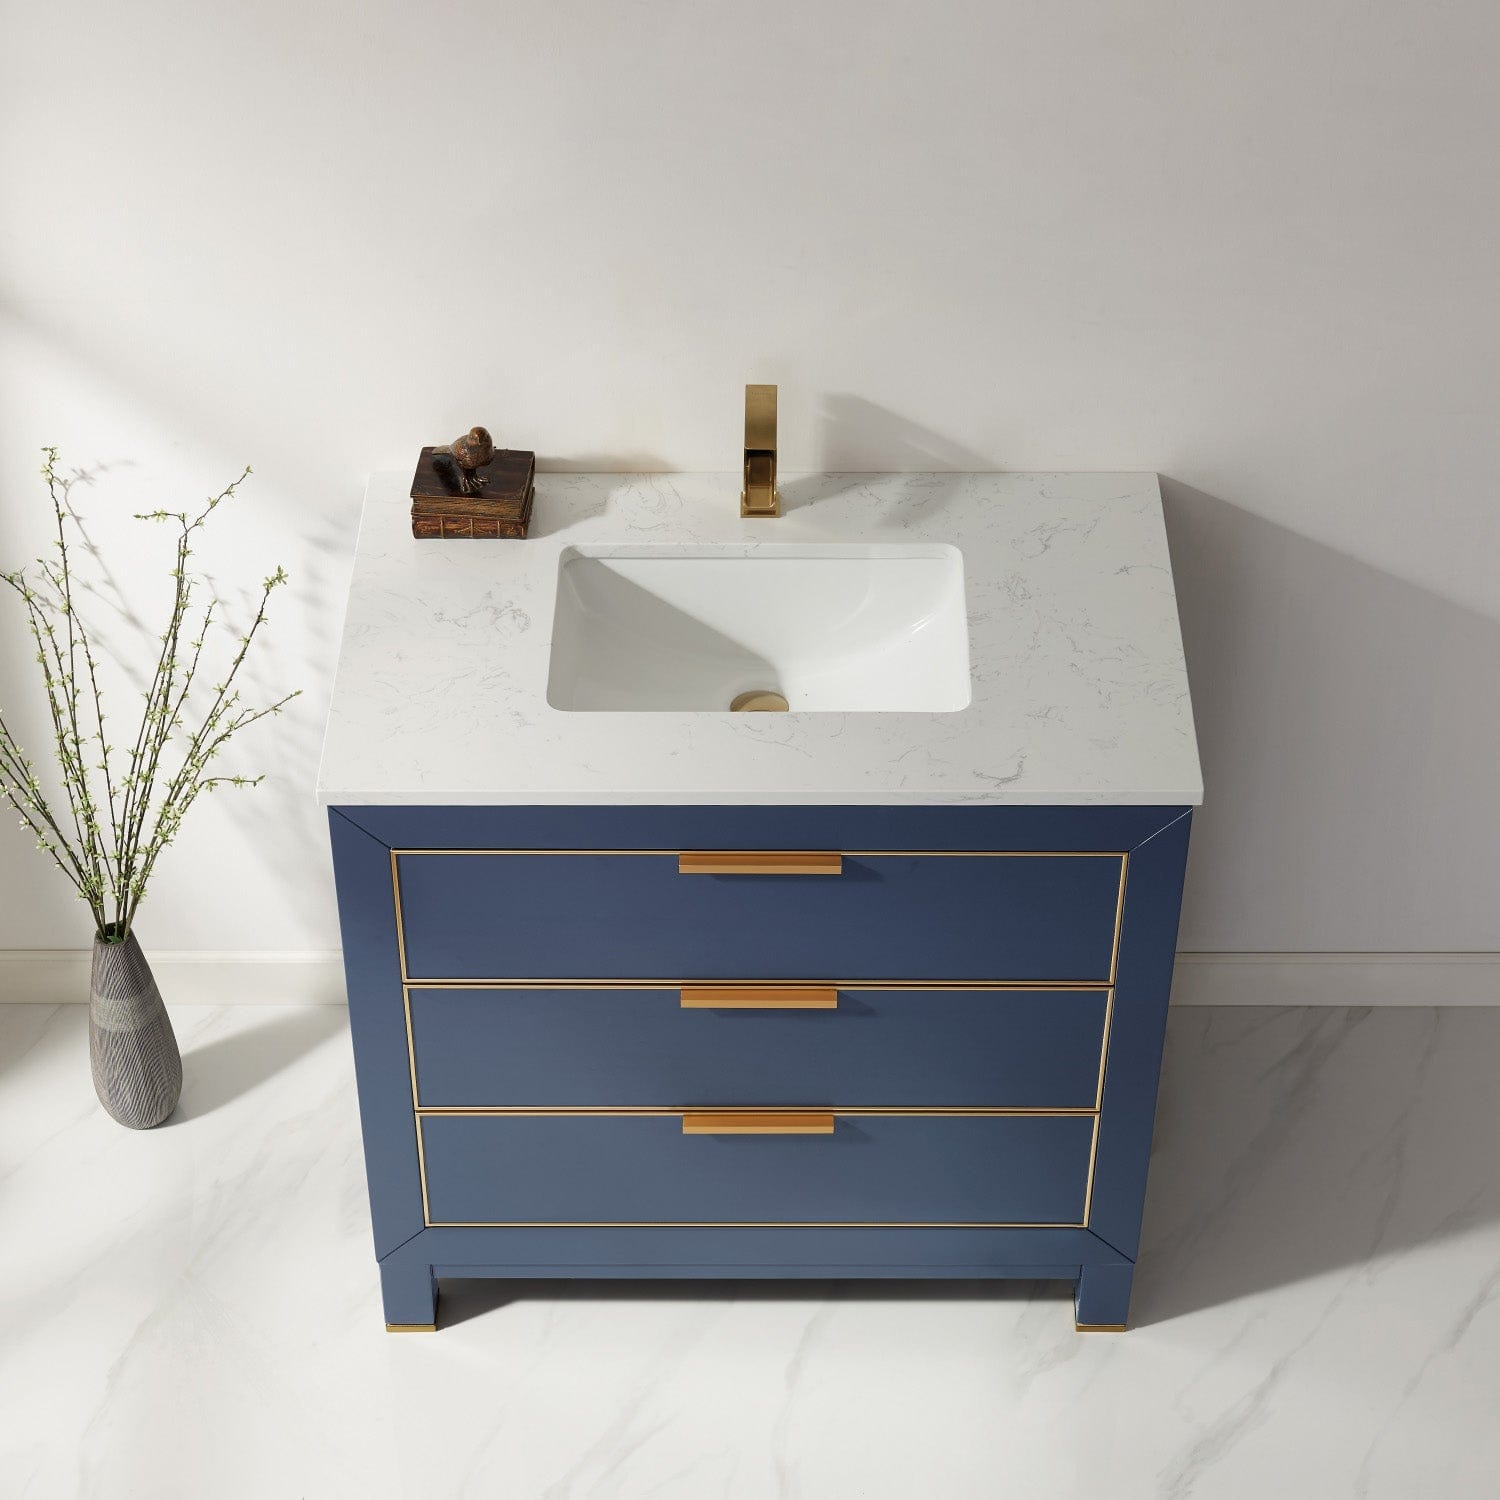 Altair Jackson 36" Single Bathroom Vanity Set in Royal Blue and Composite Carrara White Stone Countertop without Mirror 533036-RB-AW-NM - Molaix631112971584Vanity533036-RB-AW-NM